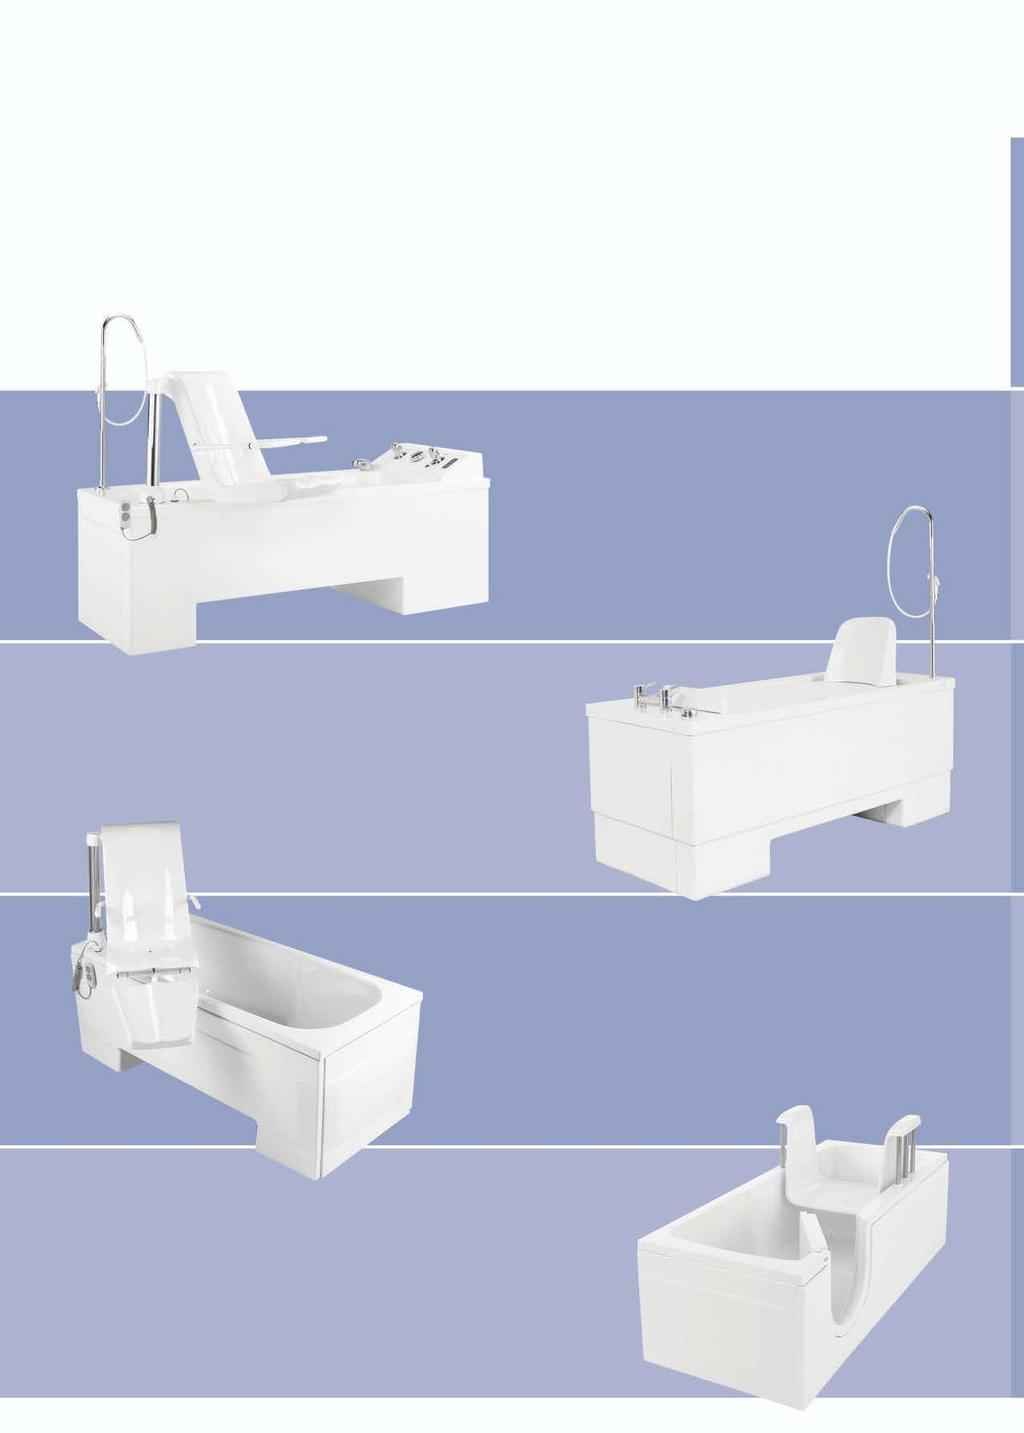 the Professional Range Bathing systems by Gainsborough Specialist Bathing Gainsborough is one of the leading manufacturers of specialist baths in Europe.